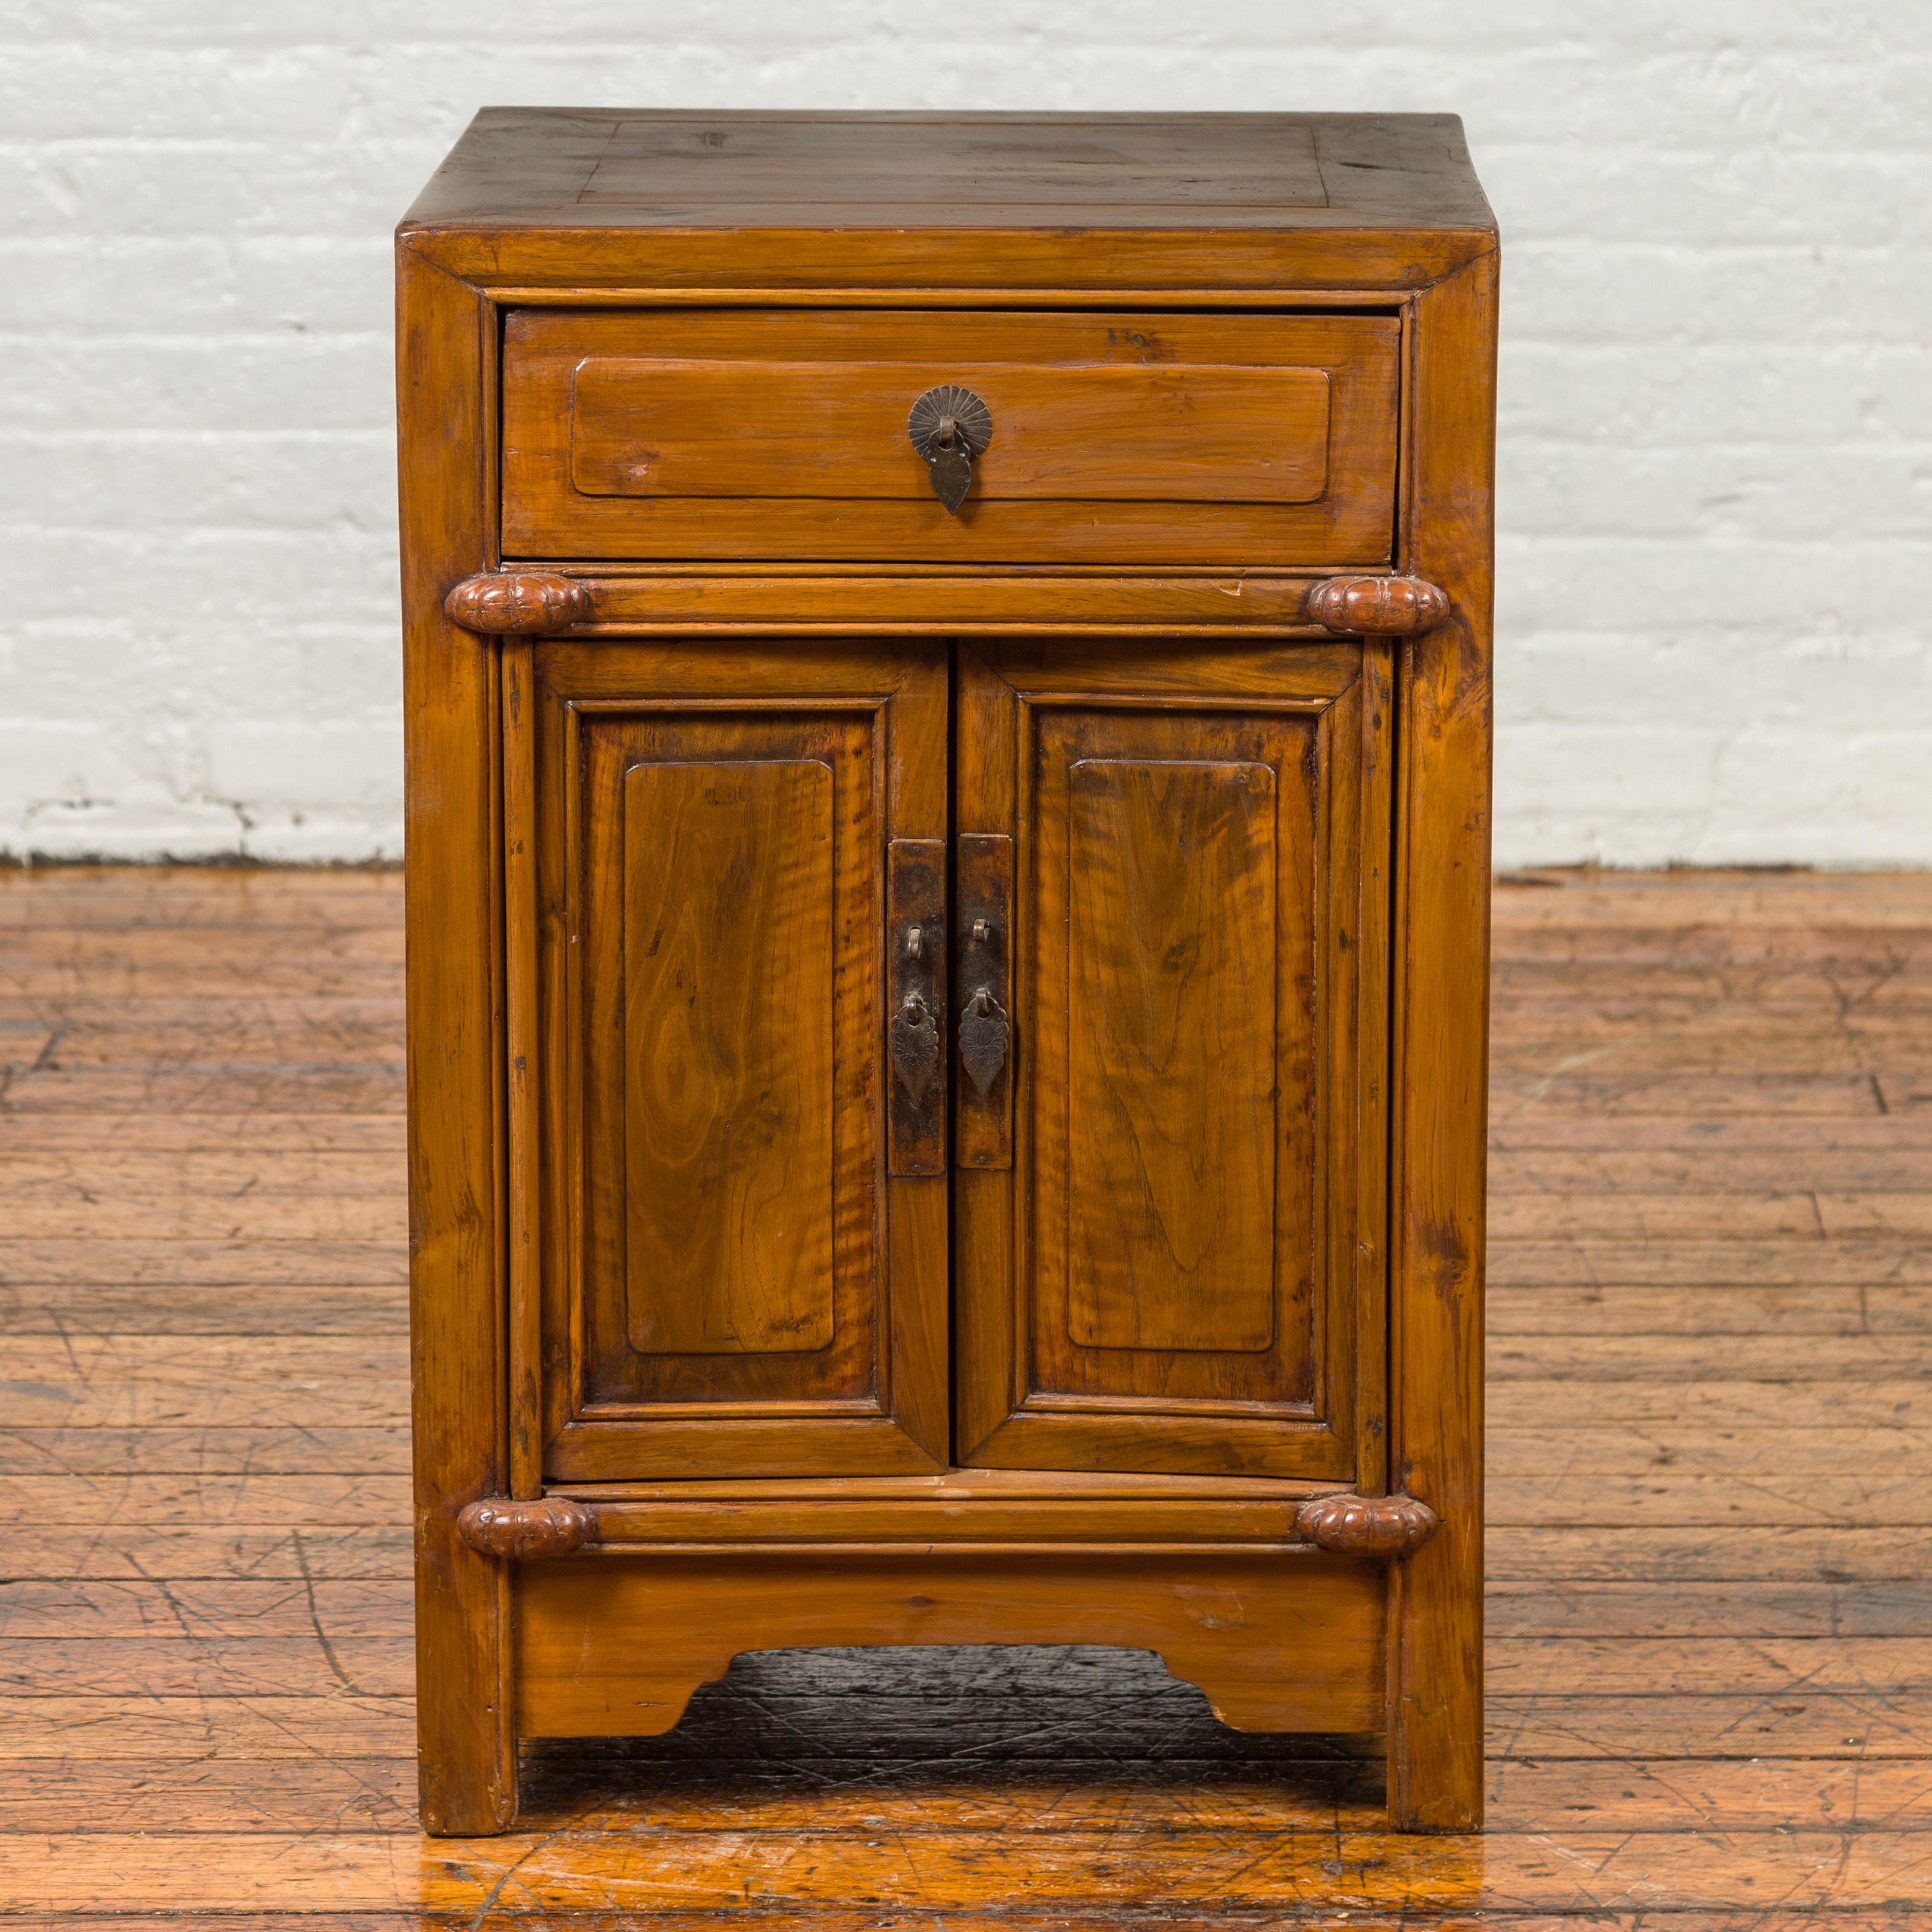 An antique Qing Dynasty period natural elmwood side chest from the 19th century, with single drawers and doors. Crafted in China during the Qing Dynasty, this elm side chest features a square top sitting above a single drawer fitted with teardrop